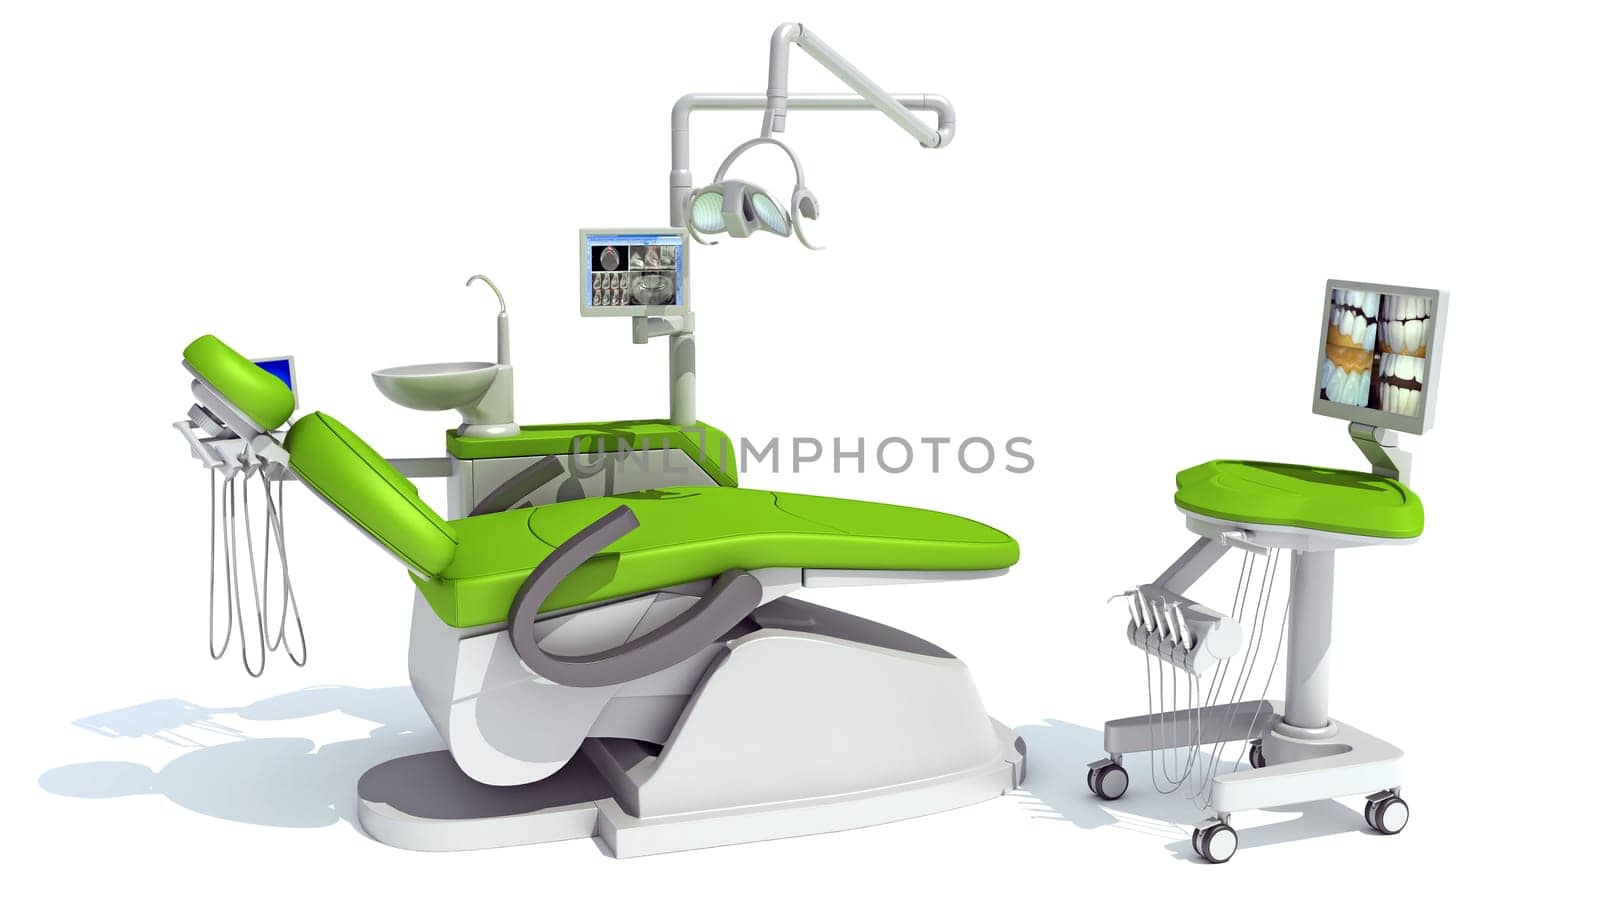 Dental treatment station unit 3D rendering on white background by 3DHorse